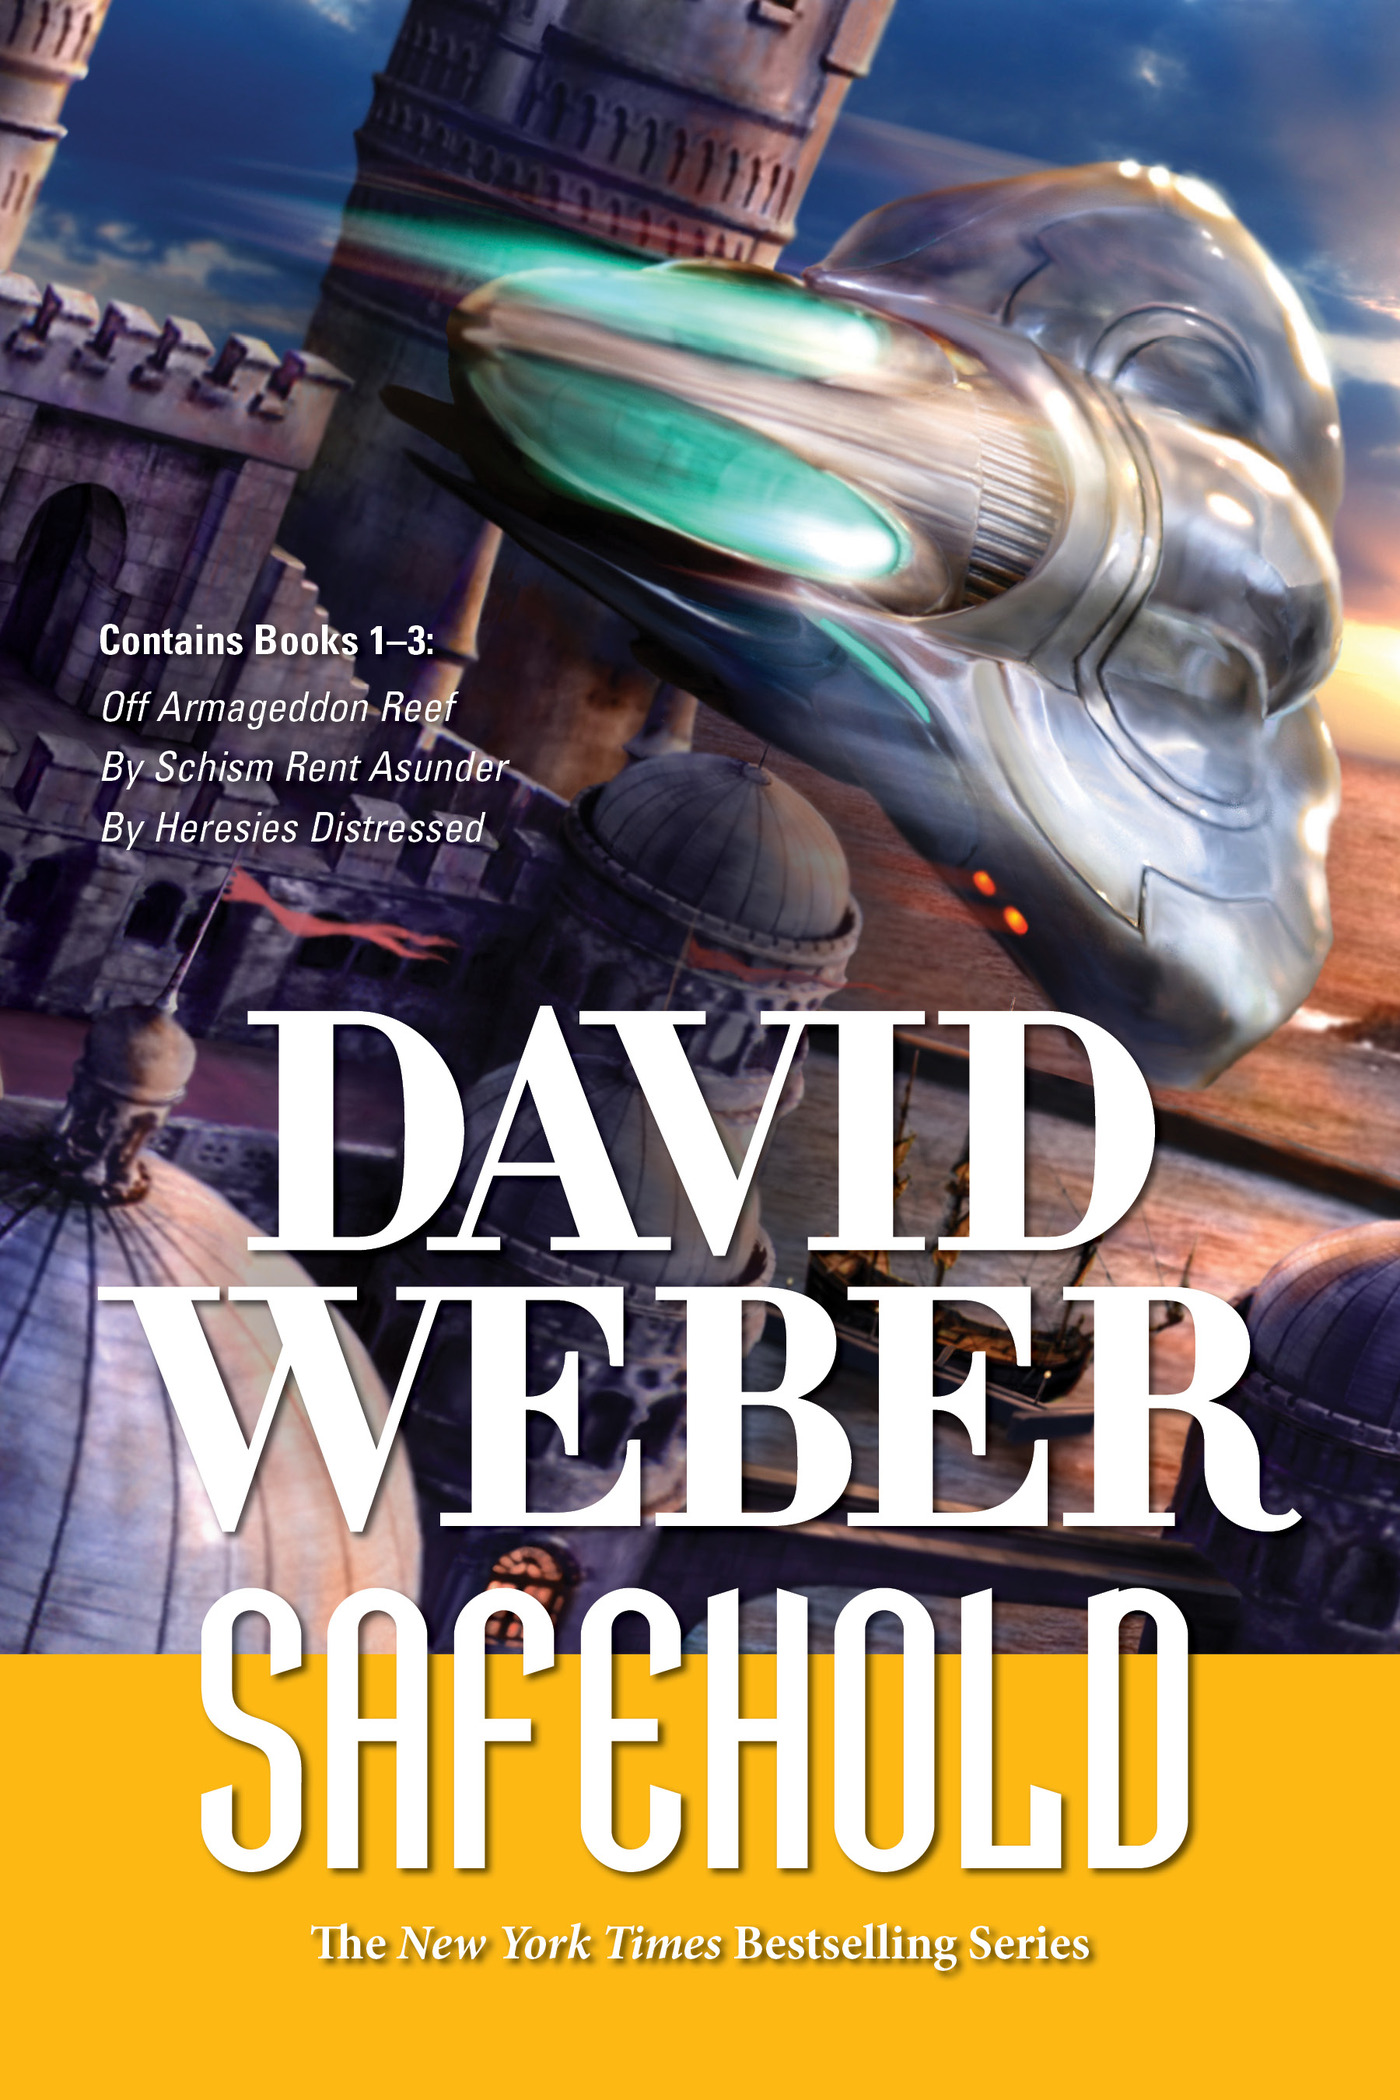 Safehold Boxed Set 1 : Off Armageddon Reef, By Schism Rent Asunder, and By Heresies Distressed by David Weber